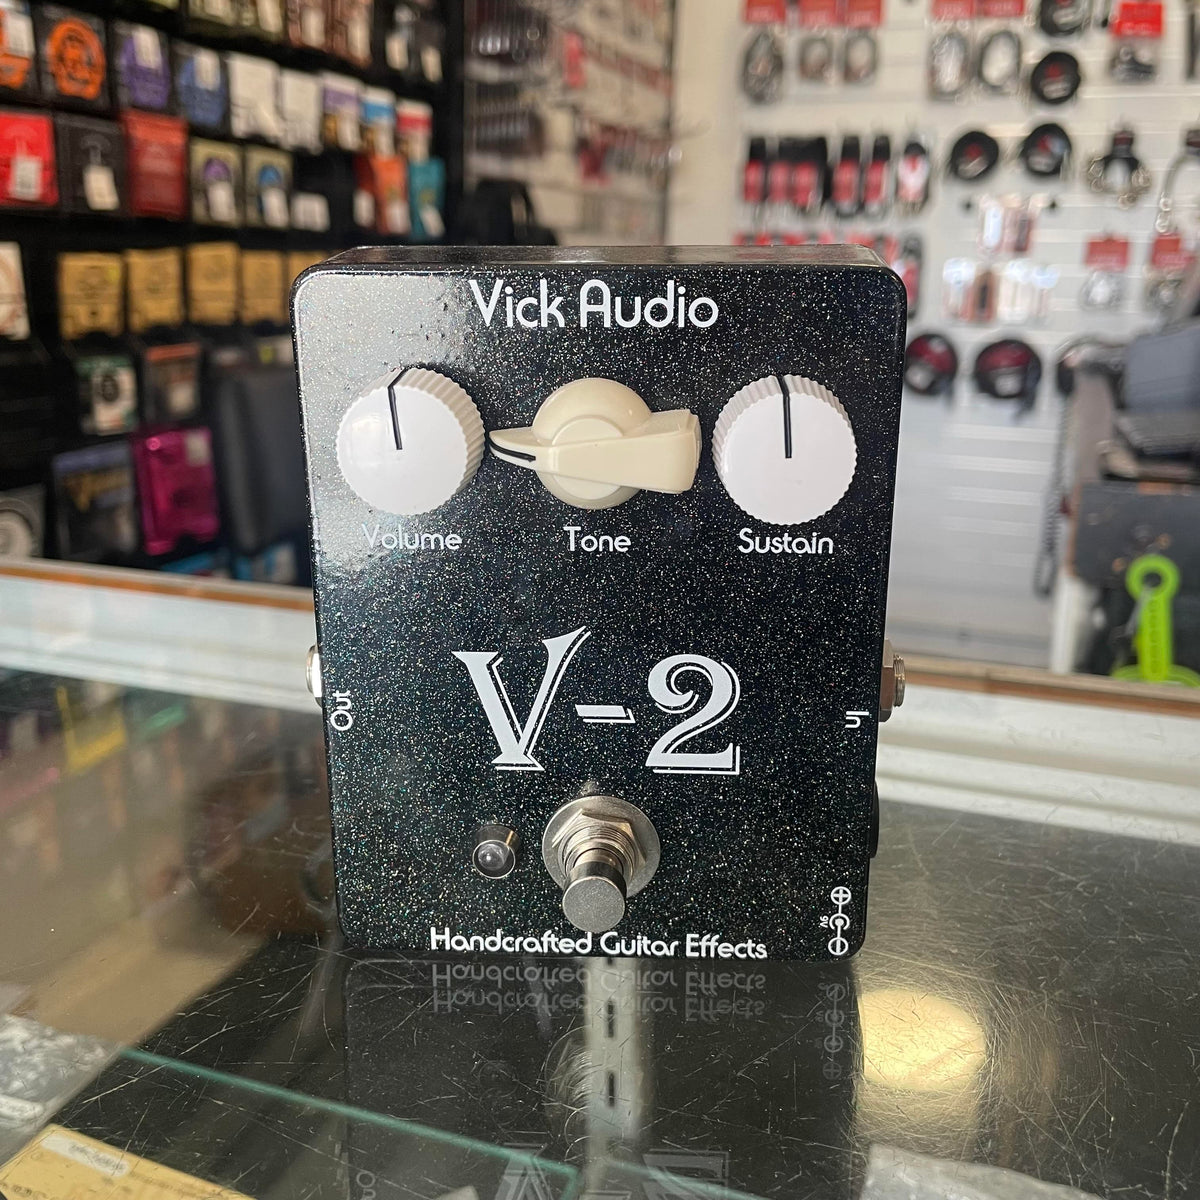 Byron Music Home Page Preloved - Vick Audio V2 Distortion Pedal Guitar Effect - Byron Music